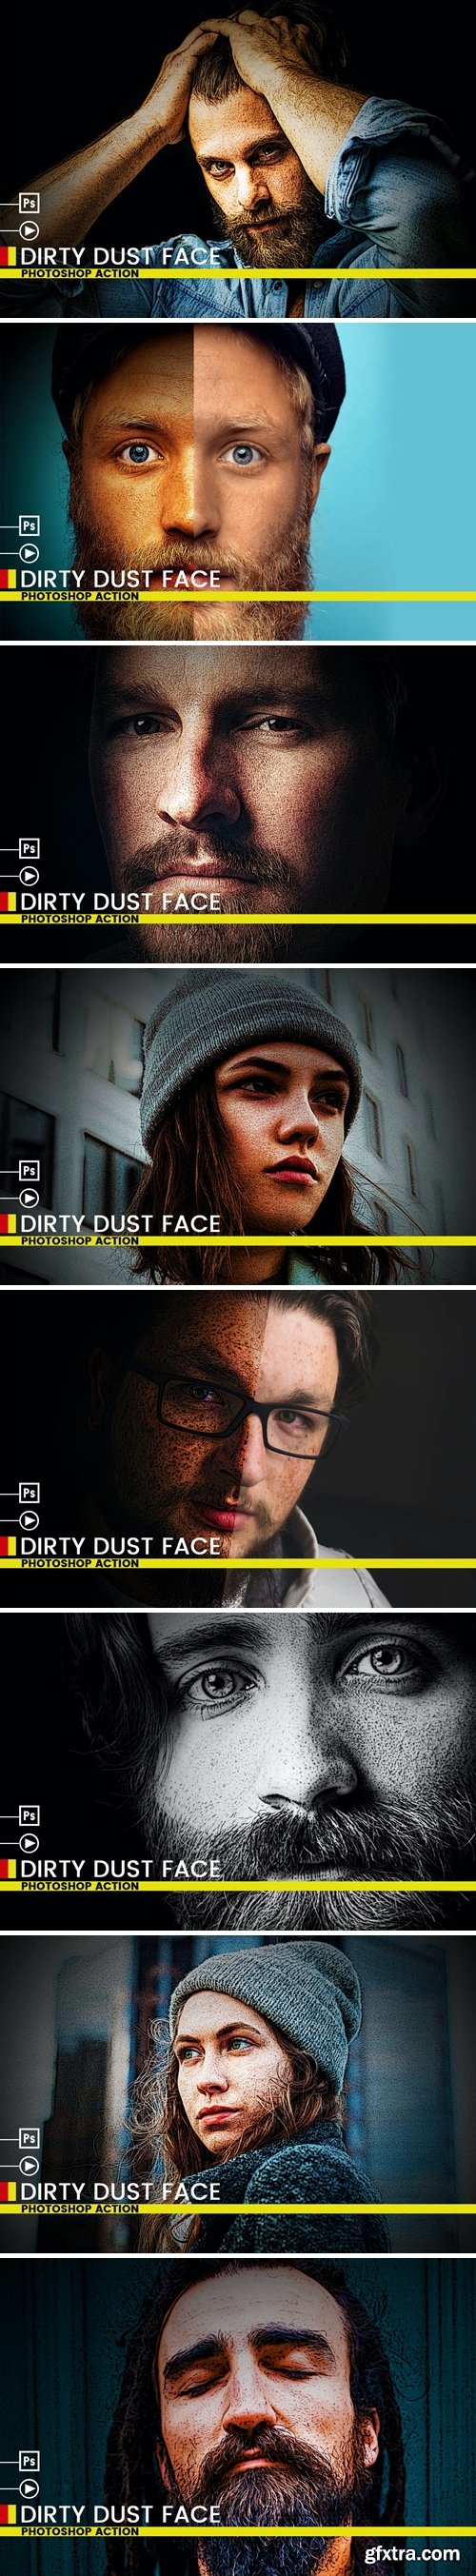 Dirty dust | PSD action